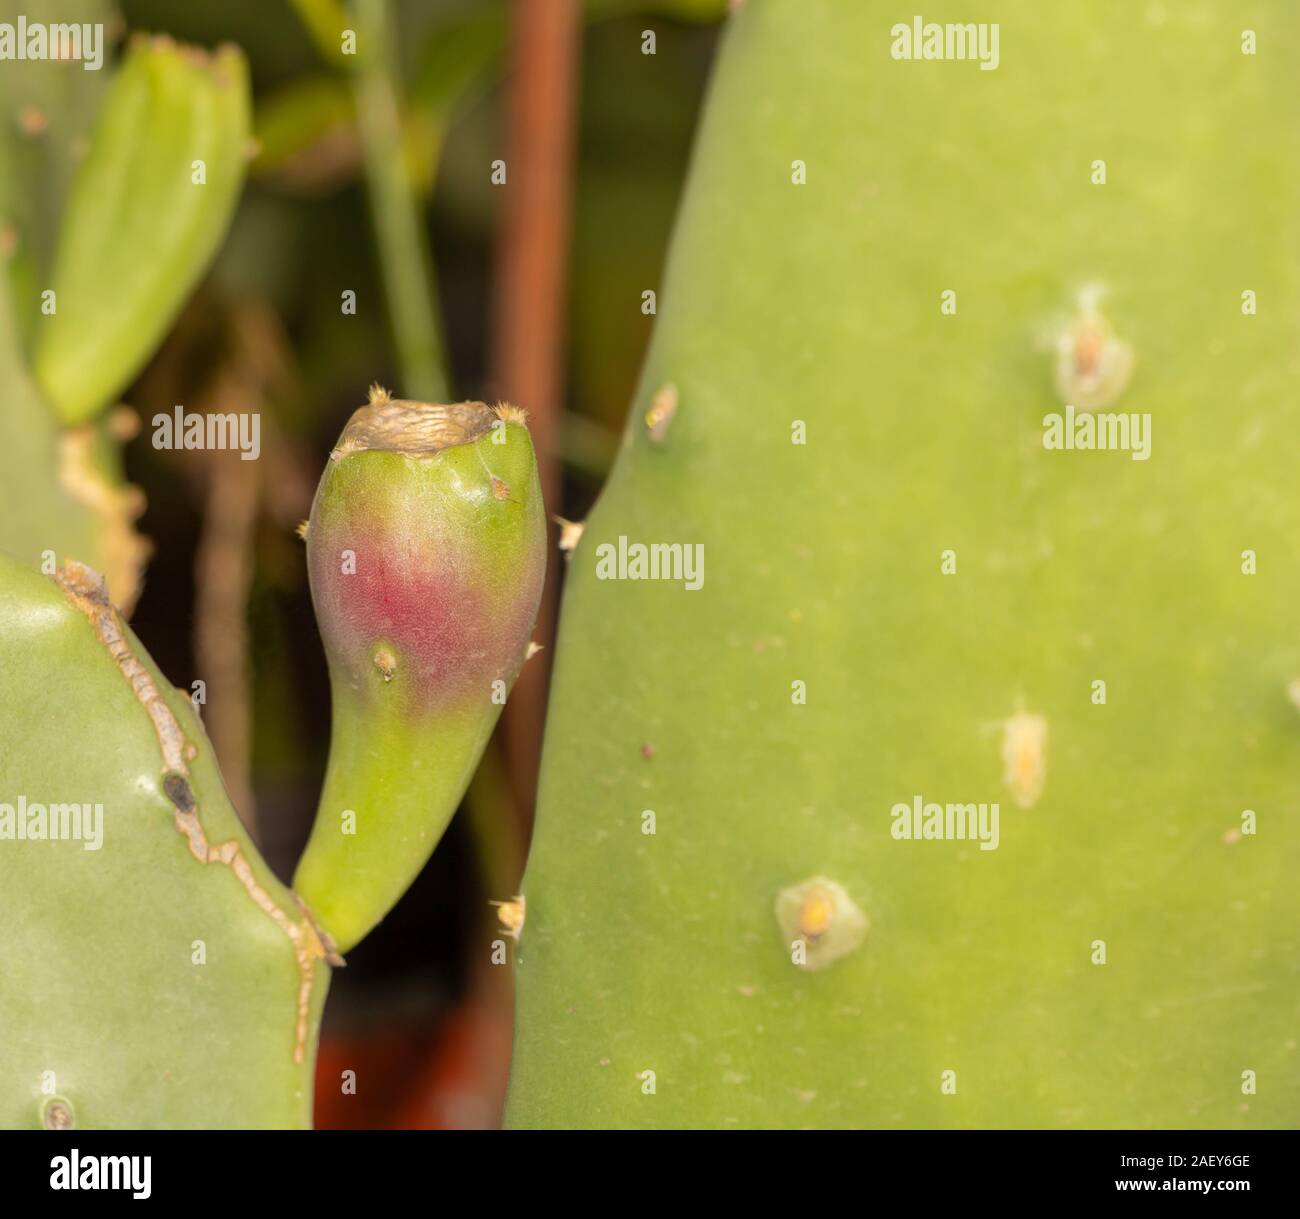 Cactus fruit ripening process. Growing opuntia cactus inside in the pot concept Stock Photo